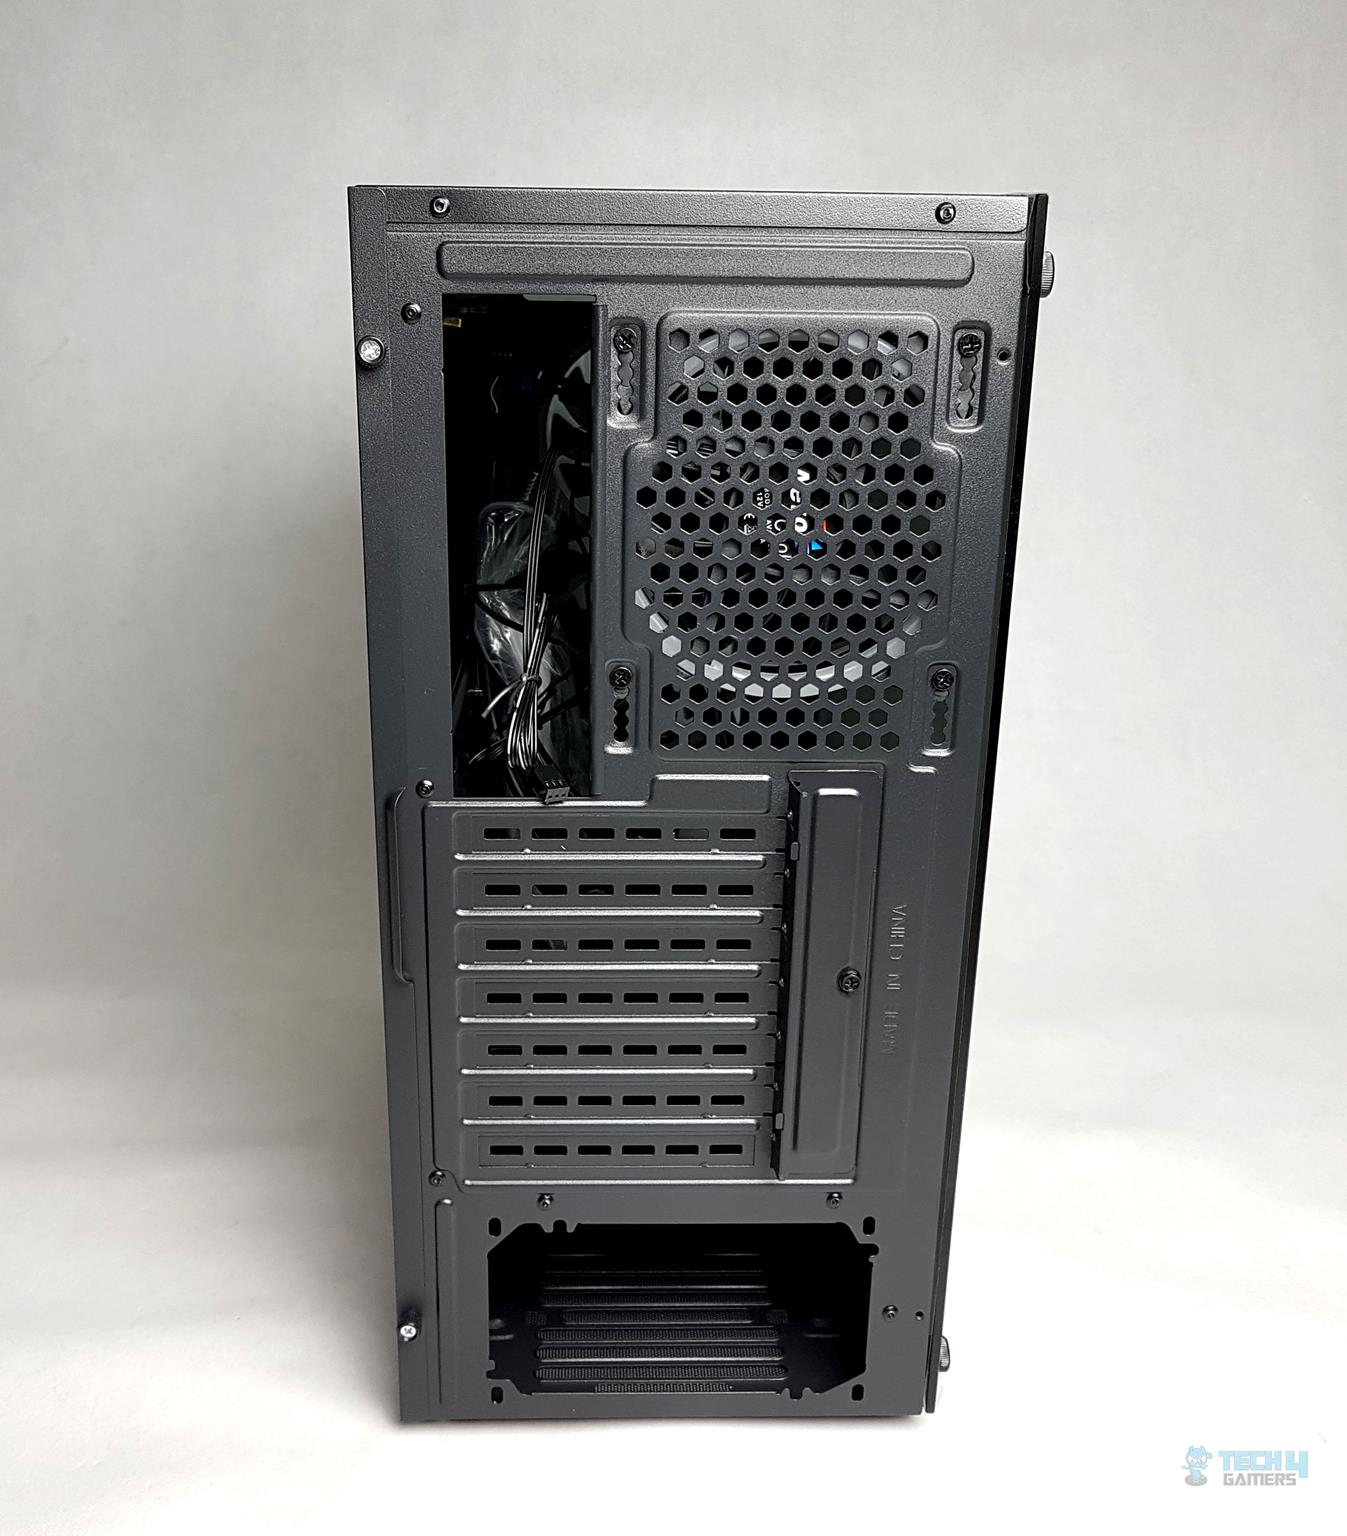  Aerocool Quartz Revo RGB Mid-Tower Chassis — The back side of the chassis